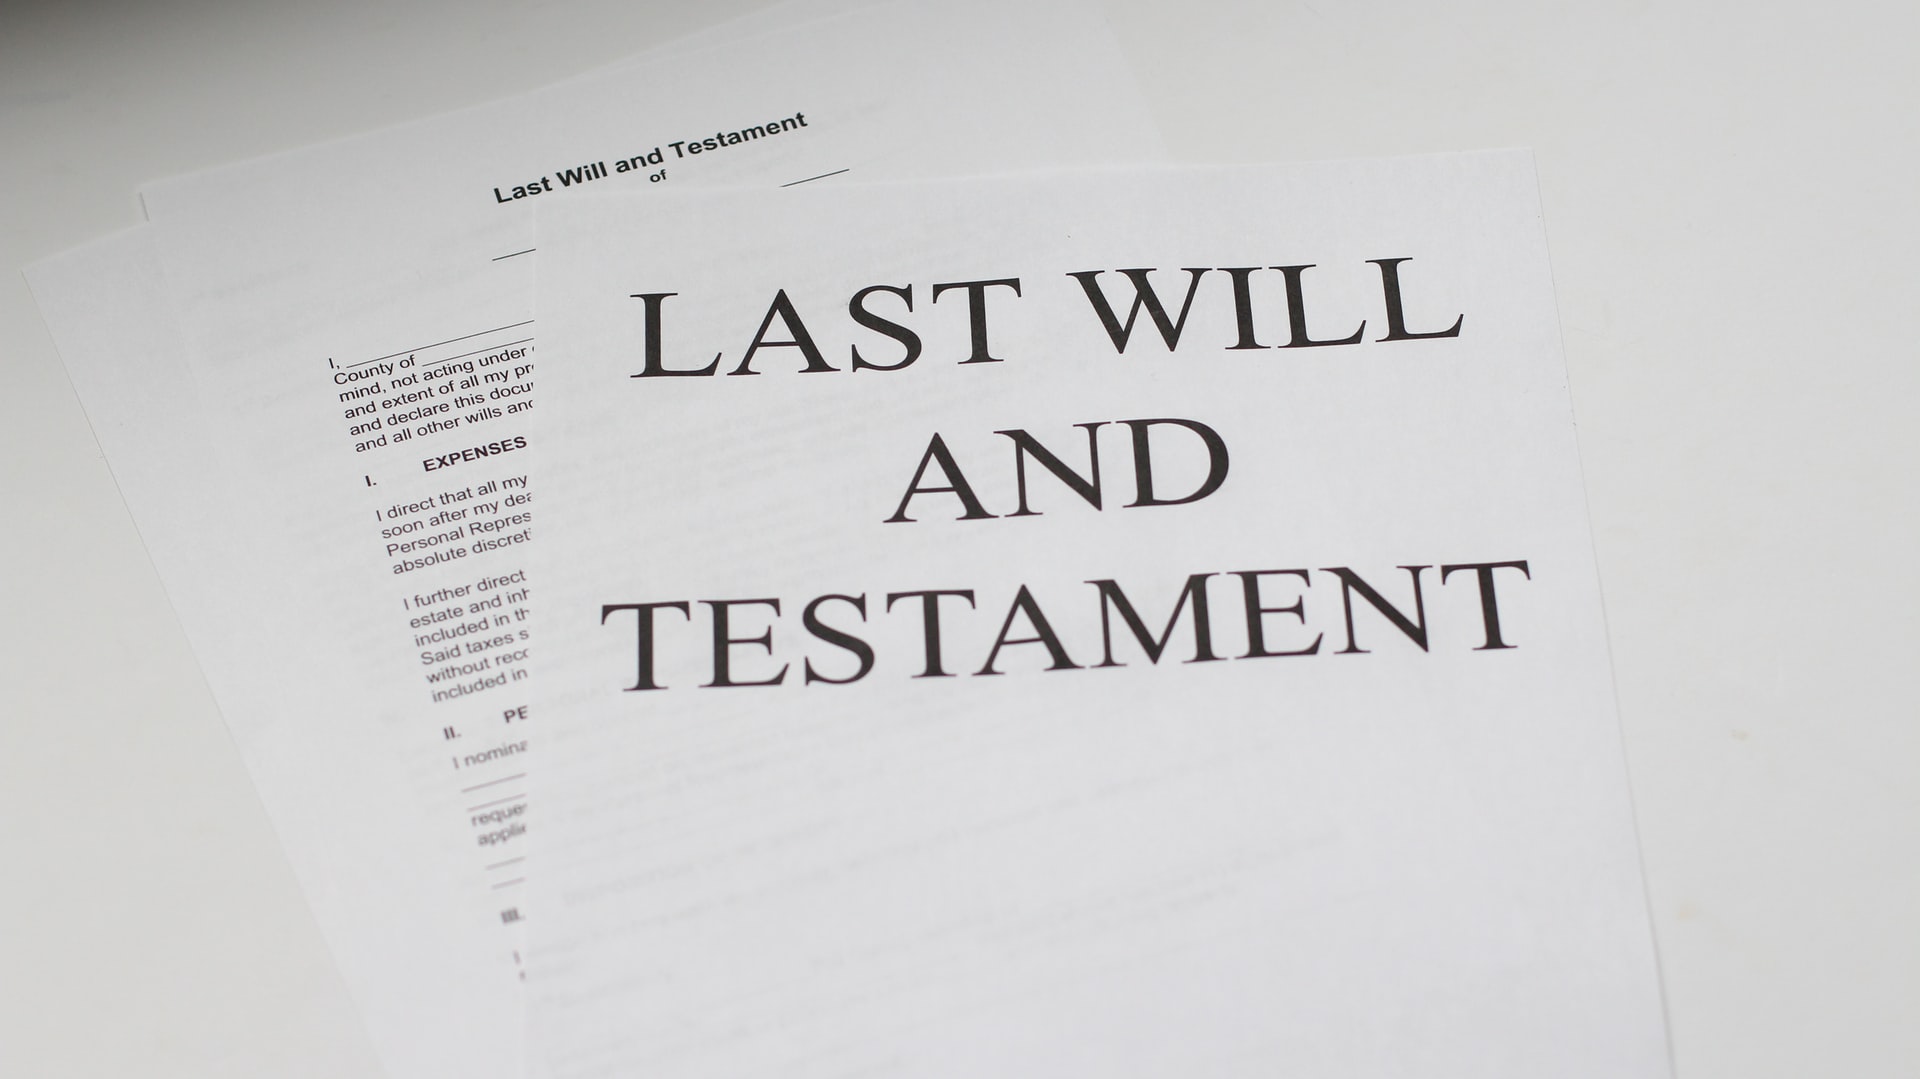 A Last Will and Testament representing new protocols allowing Ontarians to sign wills virtually due to COVID-19